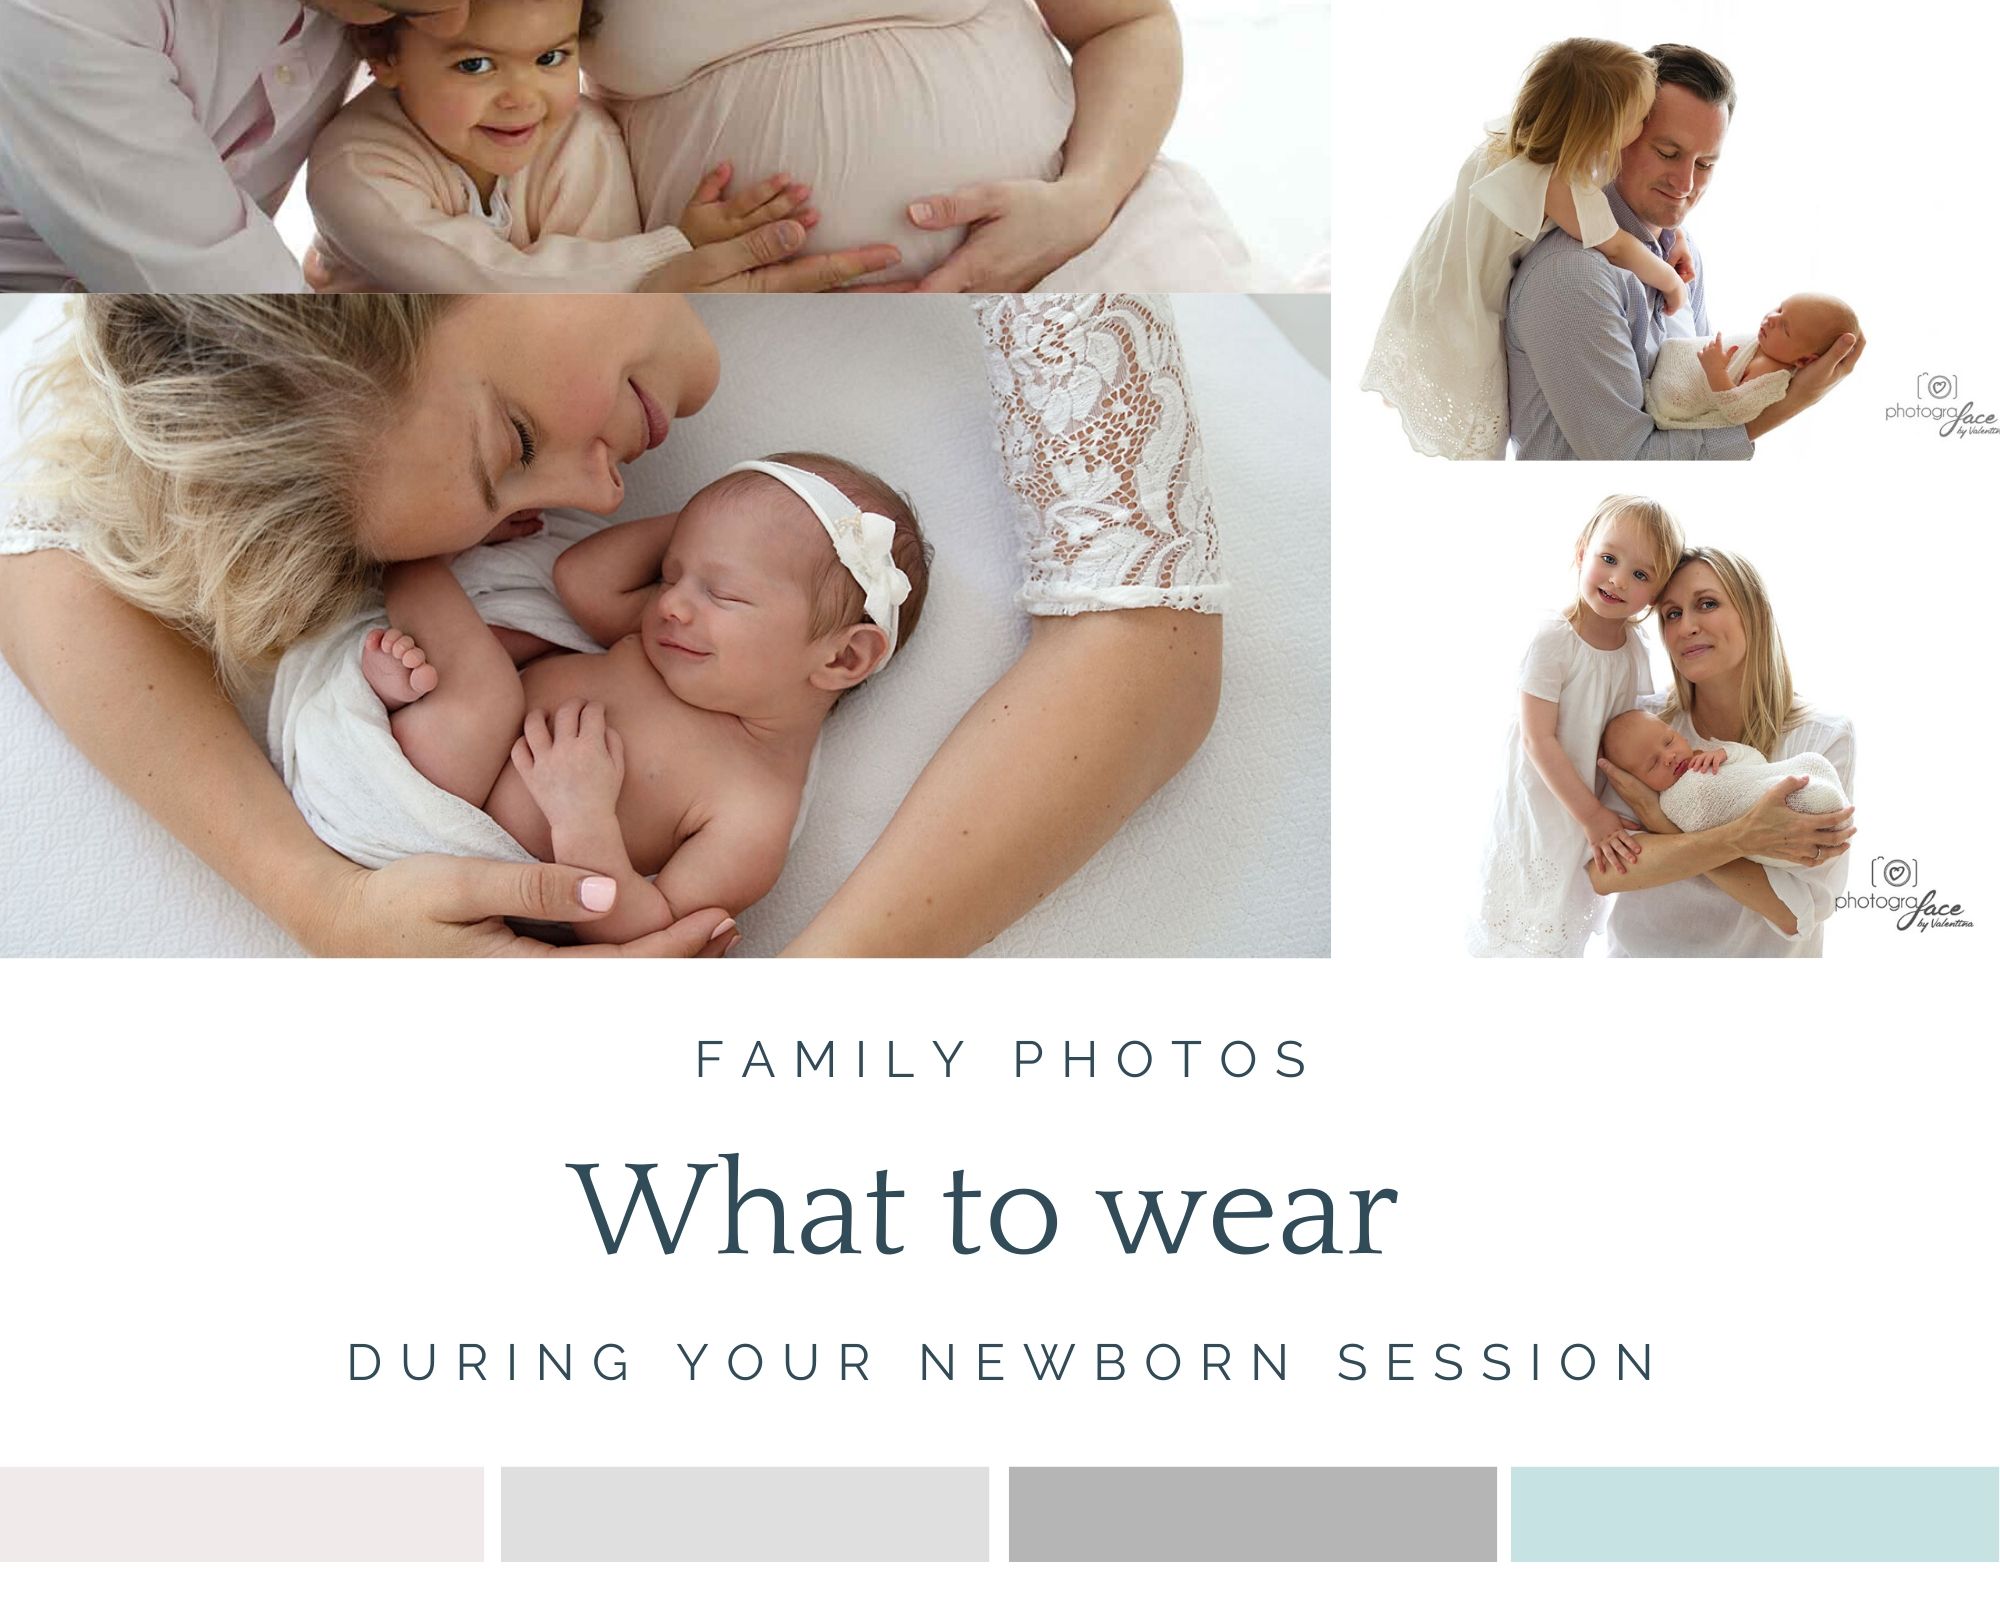 family photos what to wear: tips and inspirations